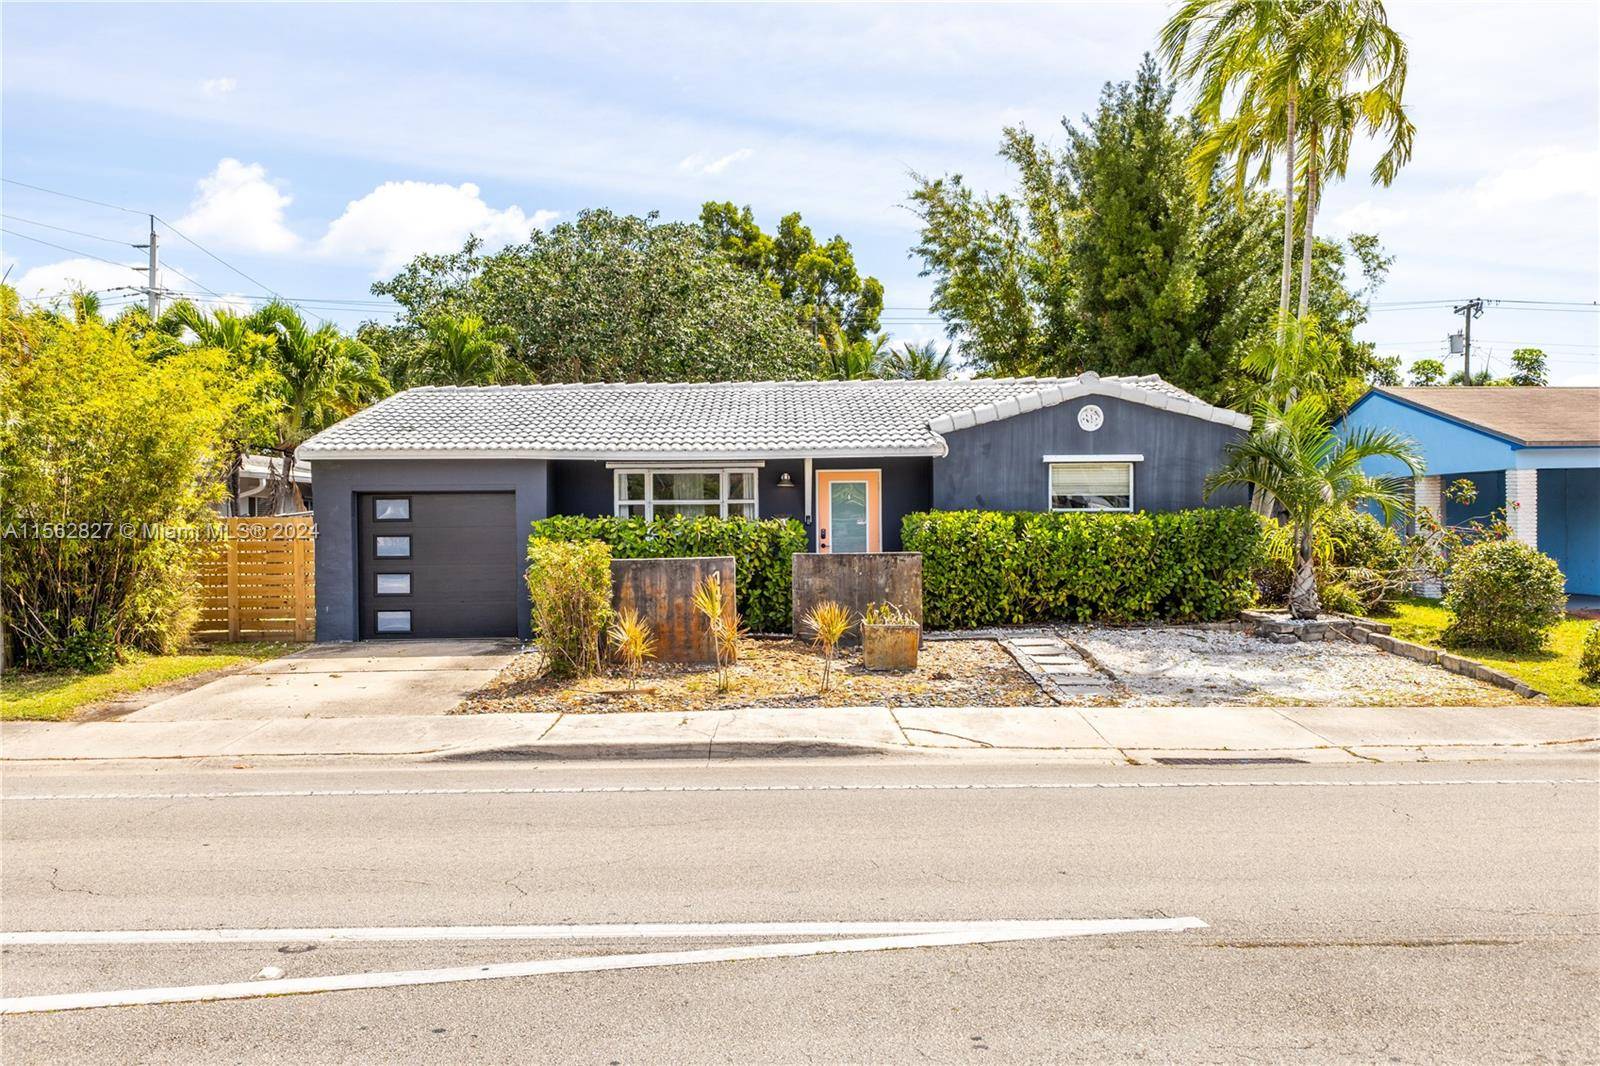 Welcome to this charming 3 bed 2 bath ranch style home, NO HOA in the coveted Poinsettia Heights neighborhood of Ft Lauderdale.